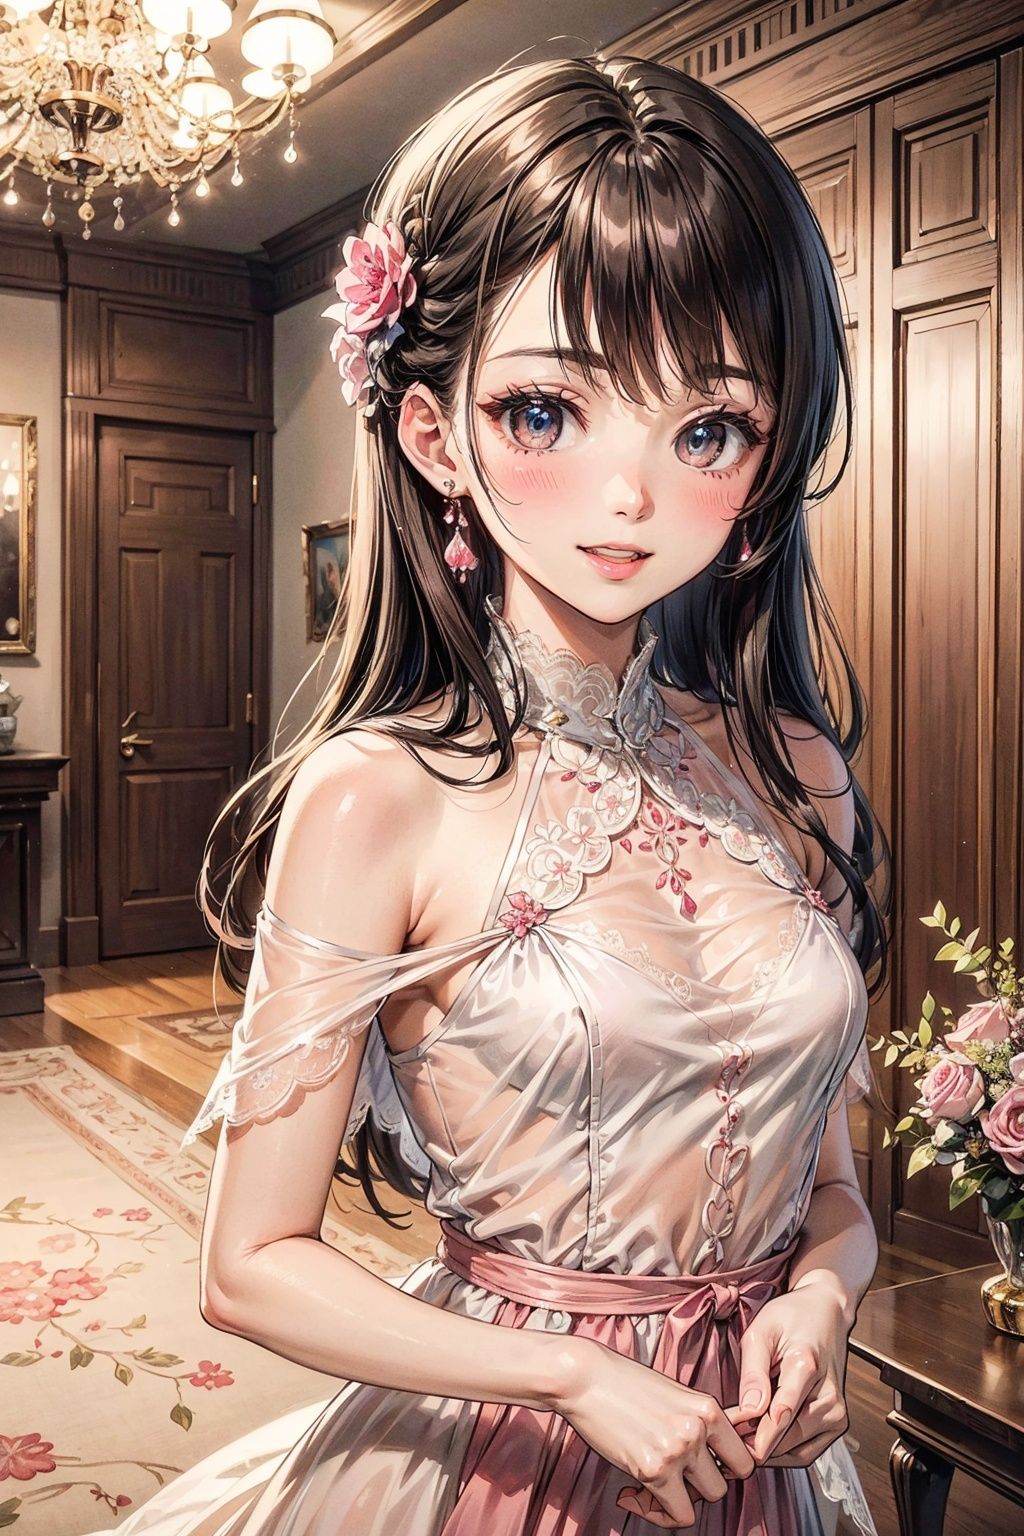 (masterpiece, the best, quality, refined character),
A beautiful woman, wearing a small pink fragrant dress, (delicate lace), a delicate fair face, wide eyes, blushing
solo
Smile, open your mouth, expose your upper body in front,
Walk forward, in the luxury villa living room, morning